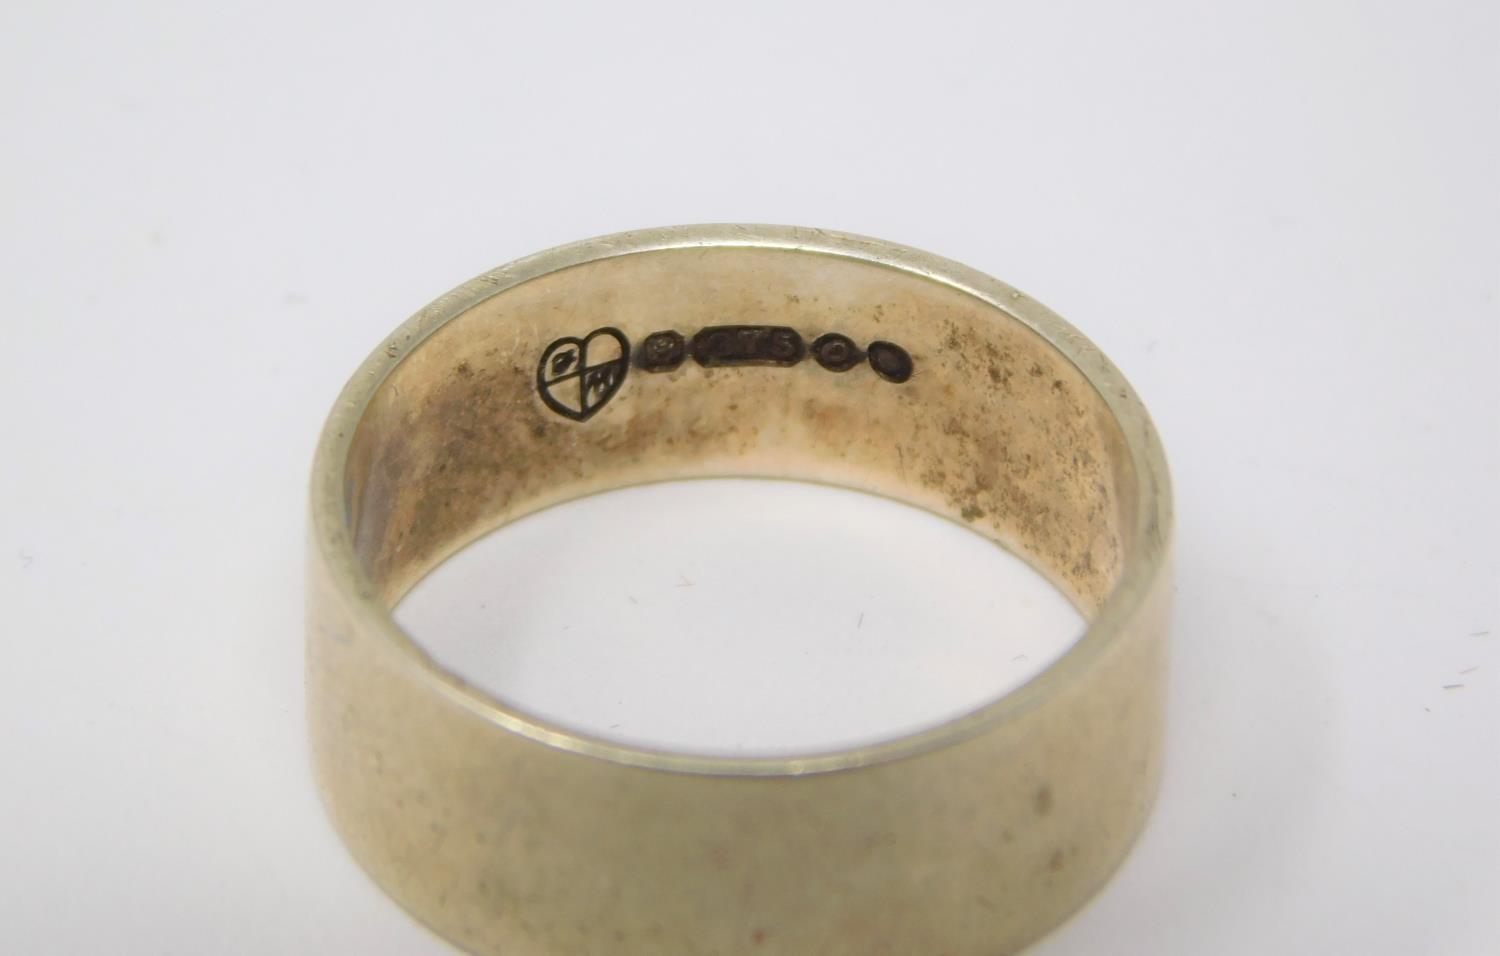 A 9ct yellow gold flat band, hallmarked 375, makers mark FW in a quartered heart for F. Mansure - Image 2 of 2